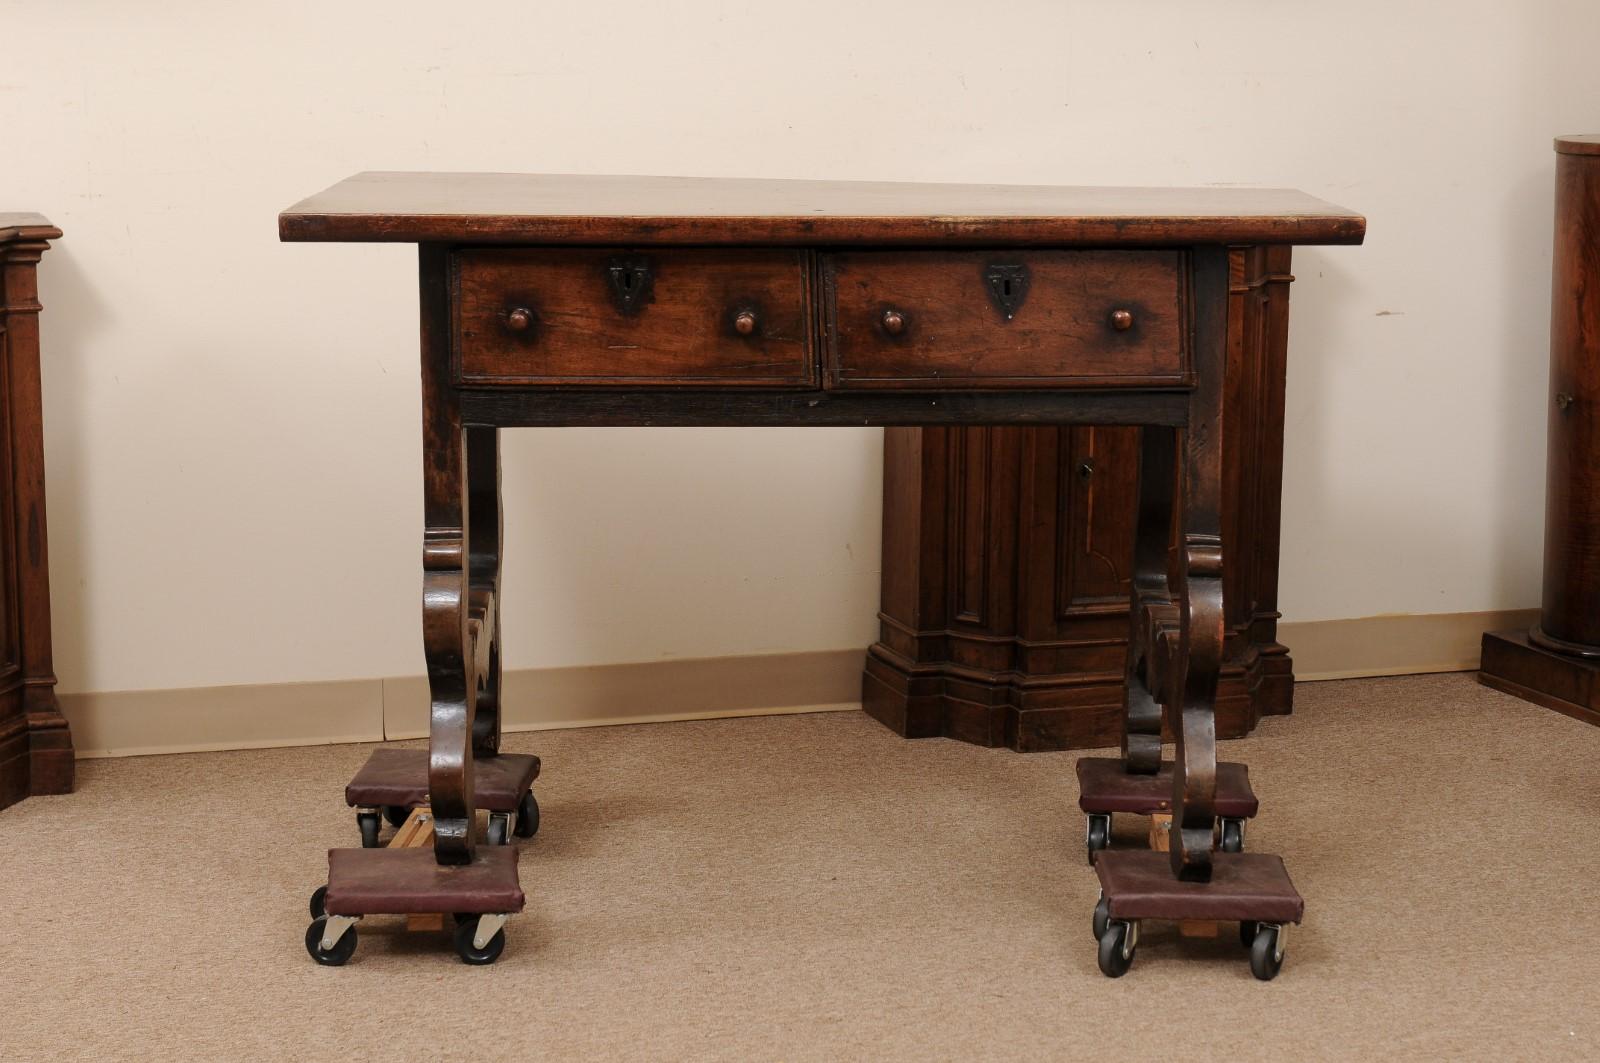 Spanish Walnut Console Table with 2 Drawers and Lyre Legs, Early 18th Century For Sale 11